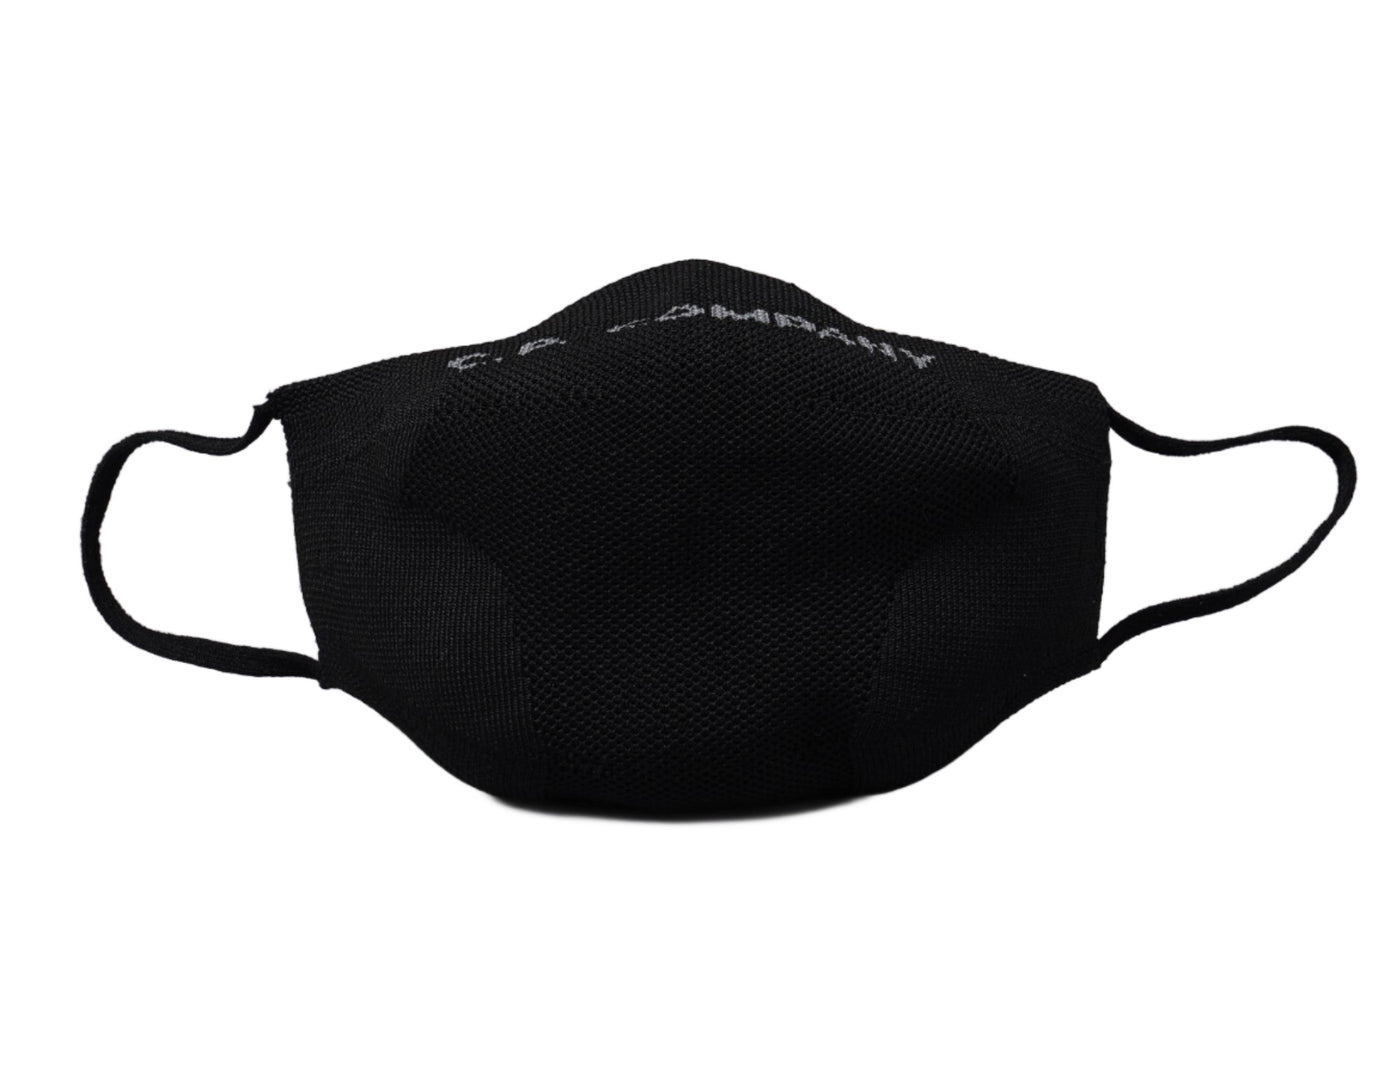 Accessorie Face Mask C.P. Company Dryarn® Face Mask Black C.P. Company Face Mask / Black / One Size